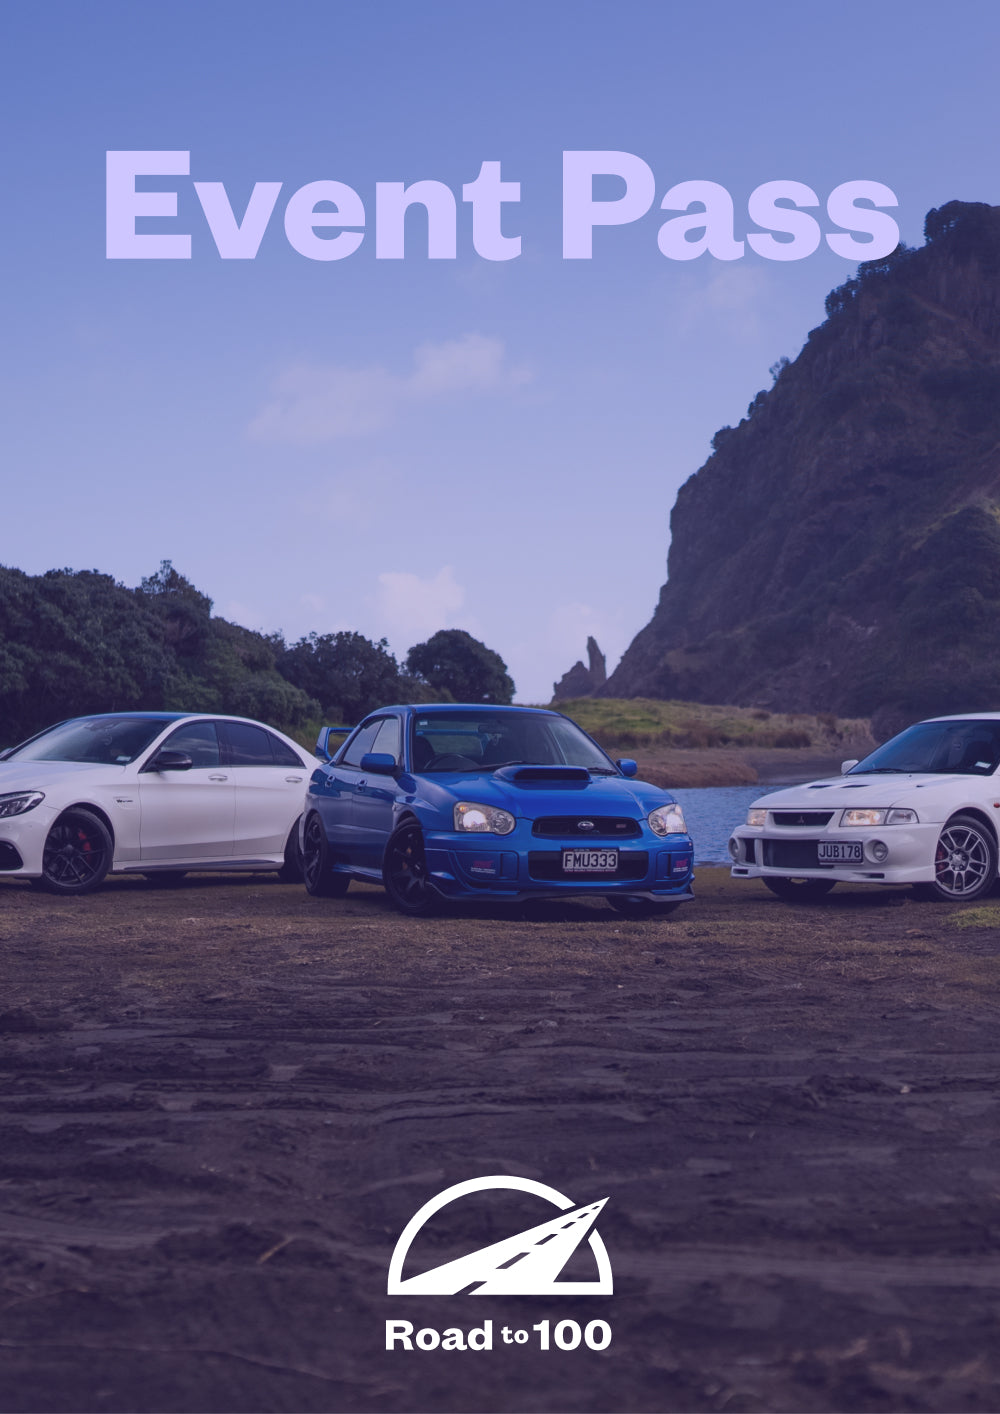 RPM x Road to 100 - Single Entry ticket